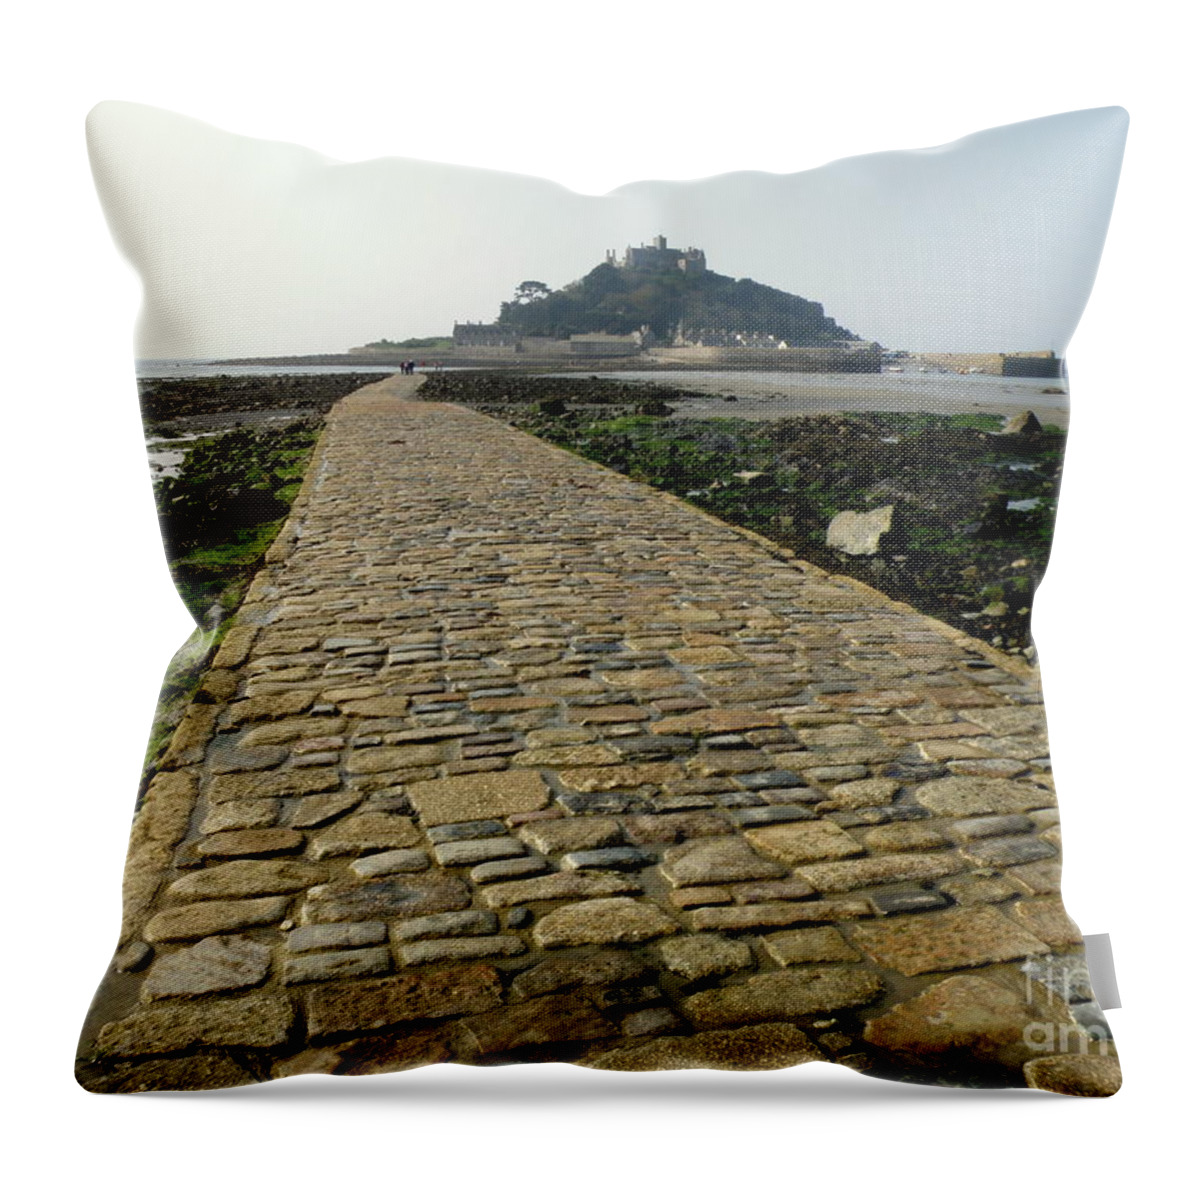 Landscape Throw Pillow featuring the photograph Saint Michael's Mount by Lainie Wrightson